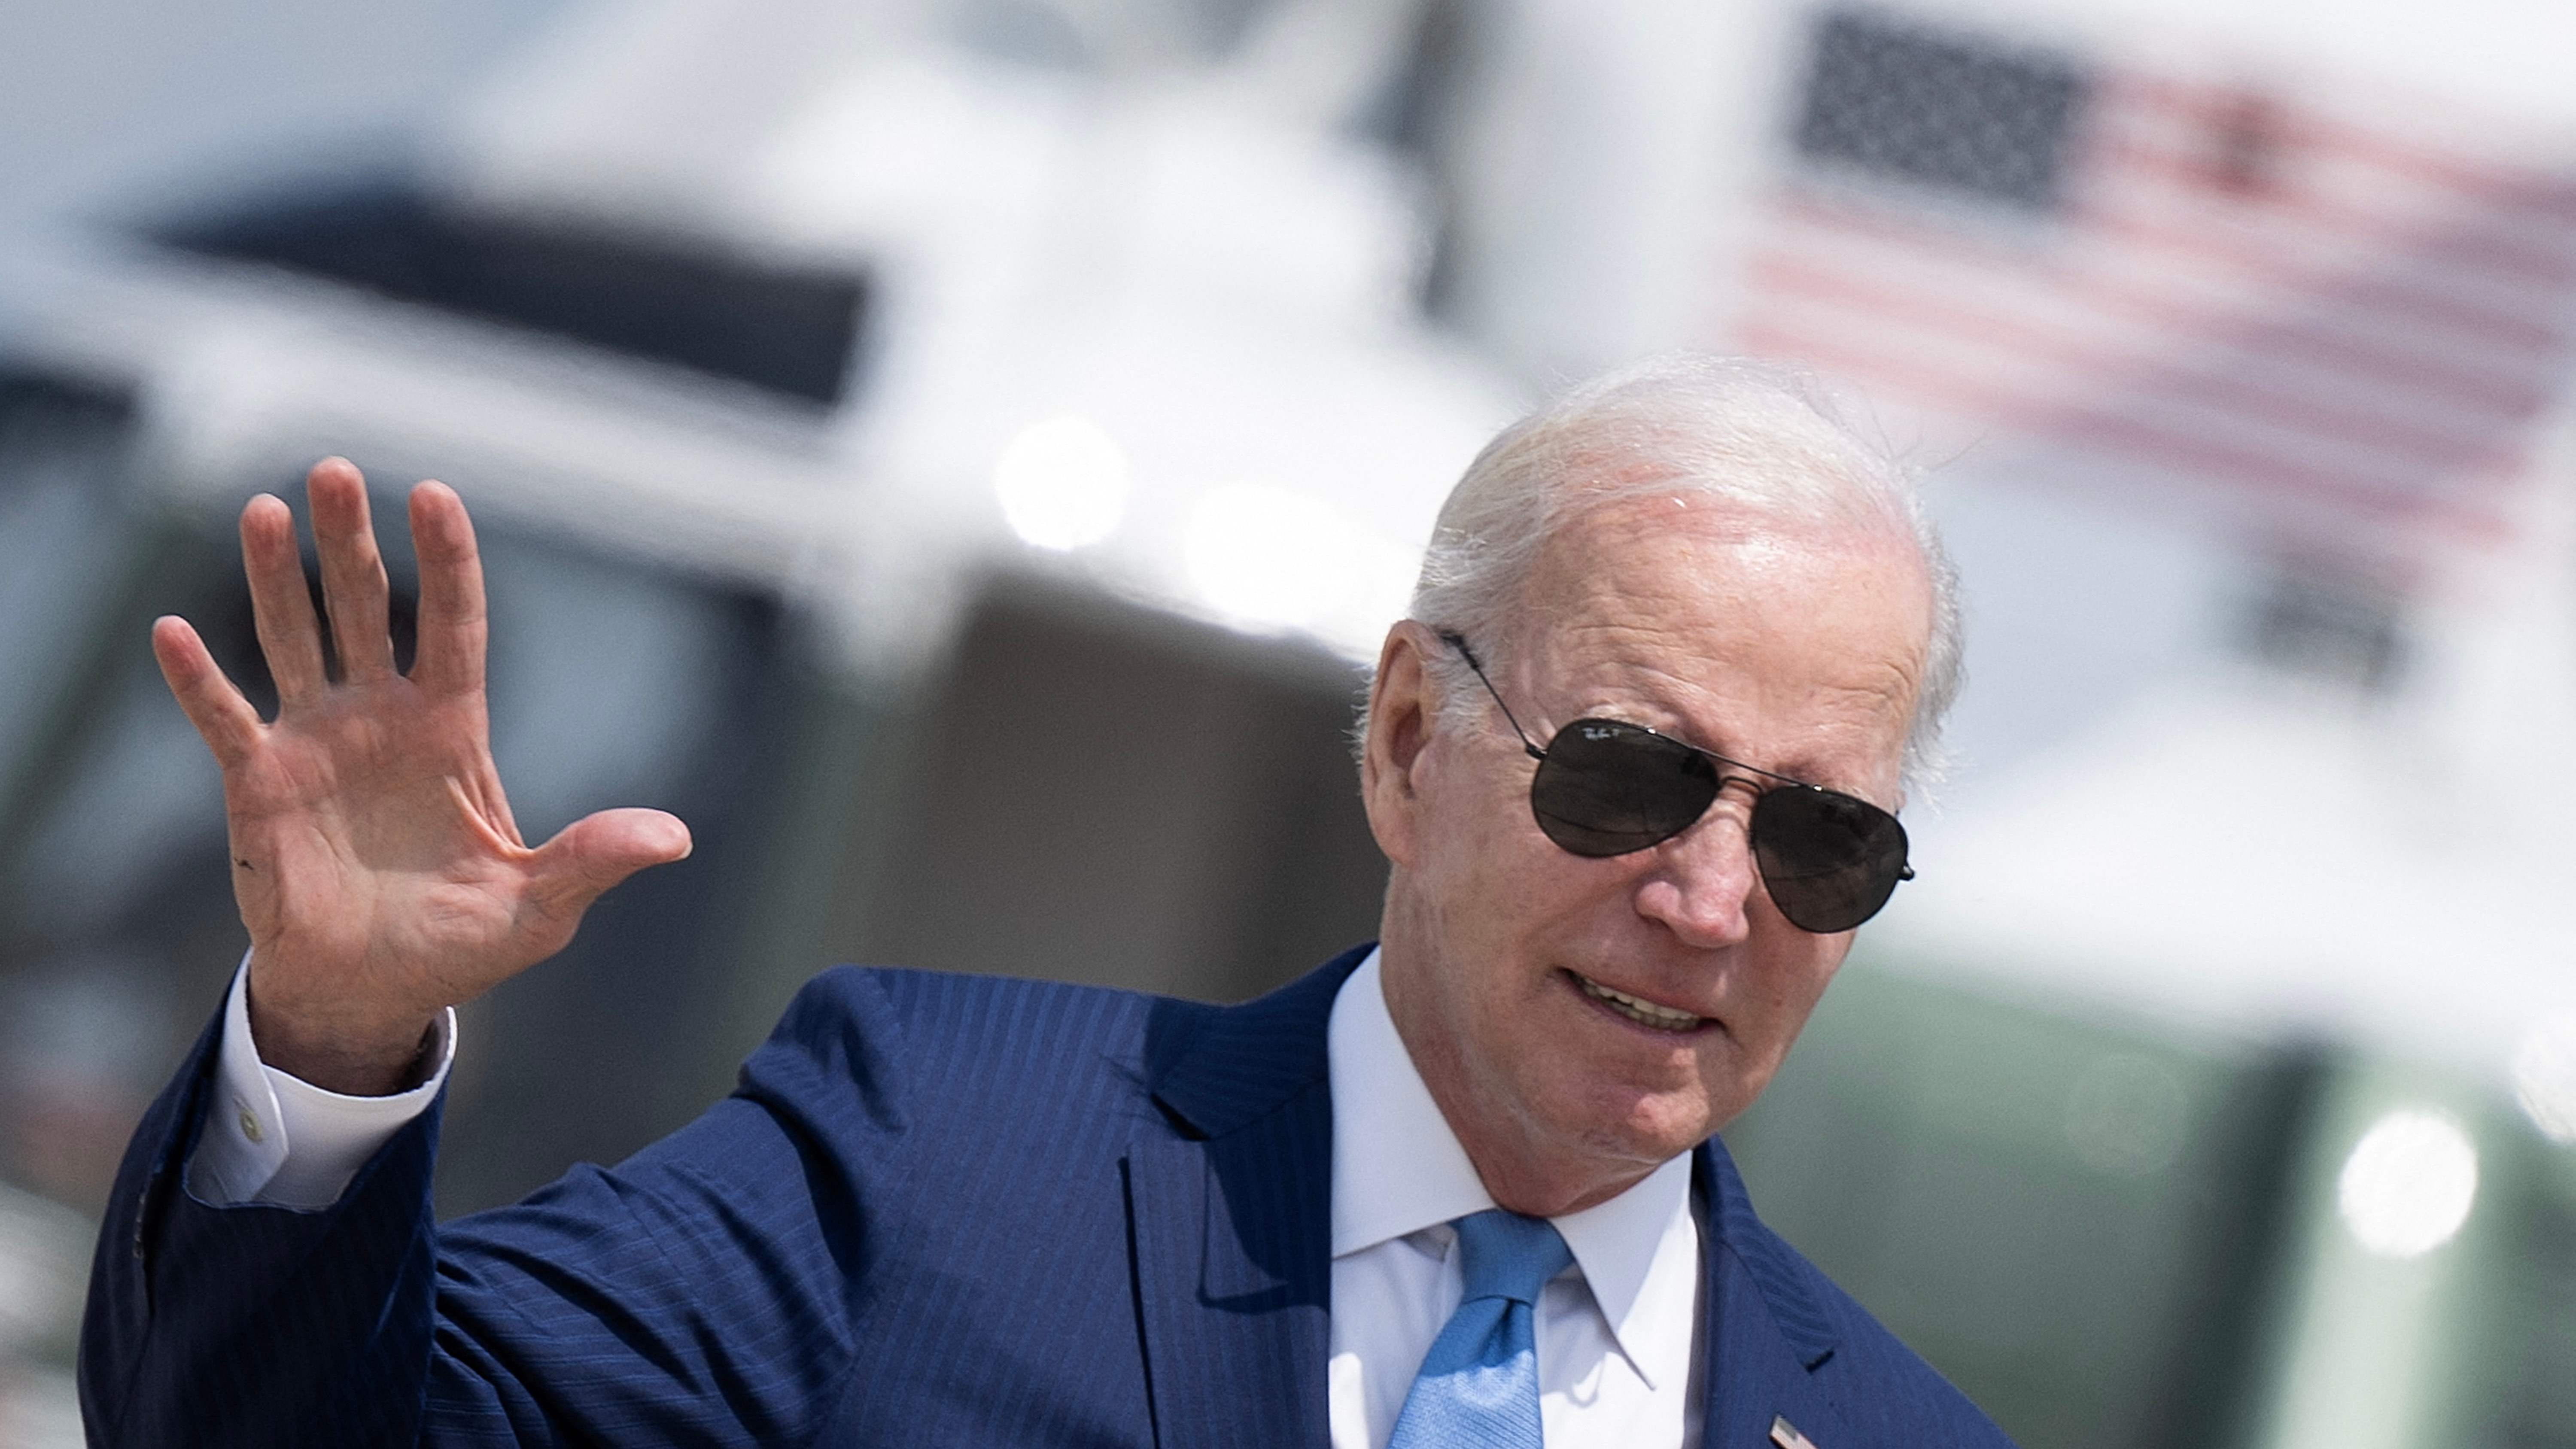 US President Joe Biden walks to board Air Force One at Joint Base Andrews in Maryland on May 17, 2023. Biden will cut short a major trip to Asia, returning May 21, 2023, to Washington for high-stakes negotiations with Republicans to avert a debt default, according to two people familiar with his plans. Biden has cancelled planned stops in Australia and Papua New Guinea, but still intends to attend the upcoming G7 meeting in Japan. (Photo by Brendan Smialowski / AFP) (Photo by BRENDAN SMIALOWSKI/AFP via Getty Images) ORIG   FILE ID: AFP_33FE2AU.jpg